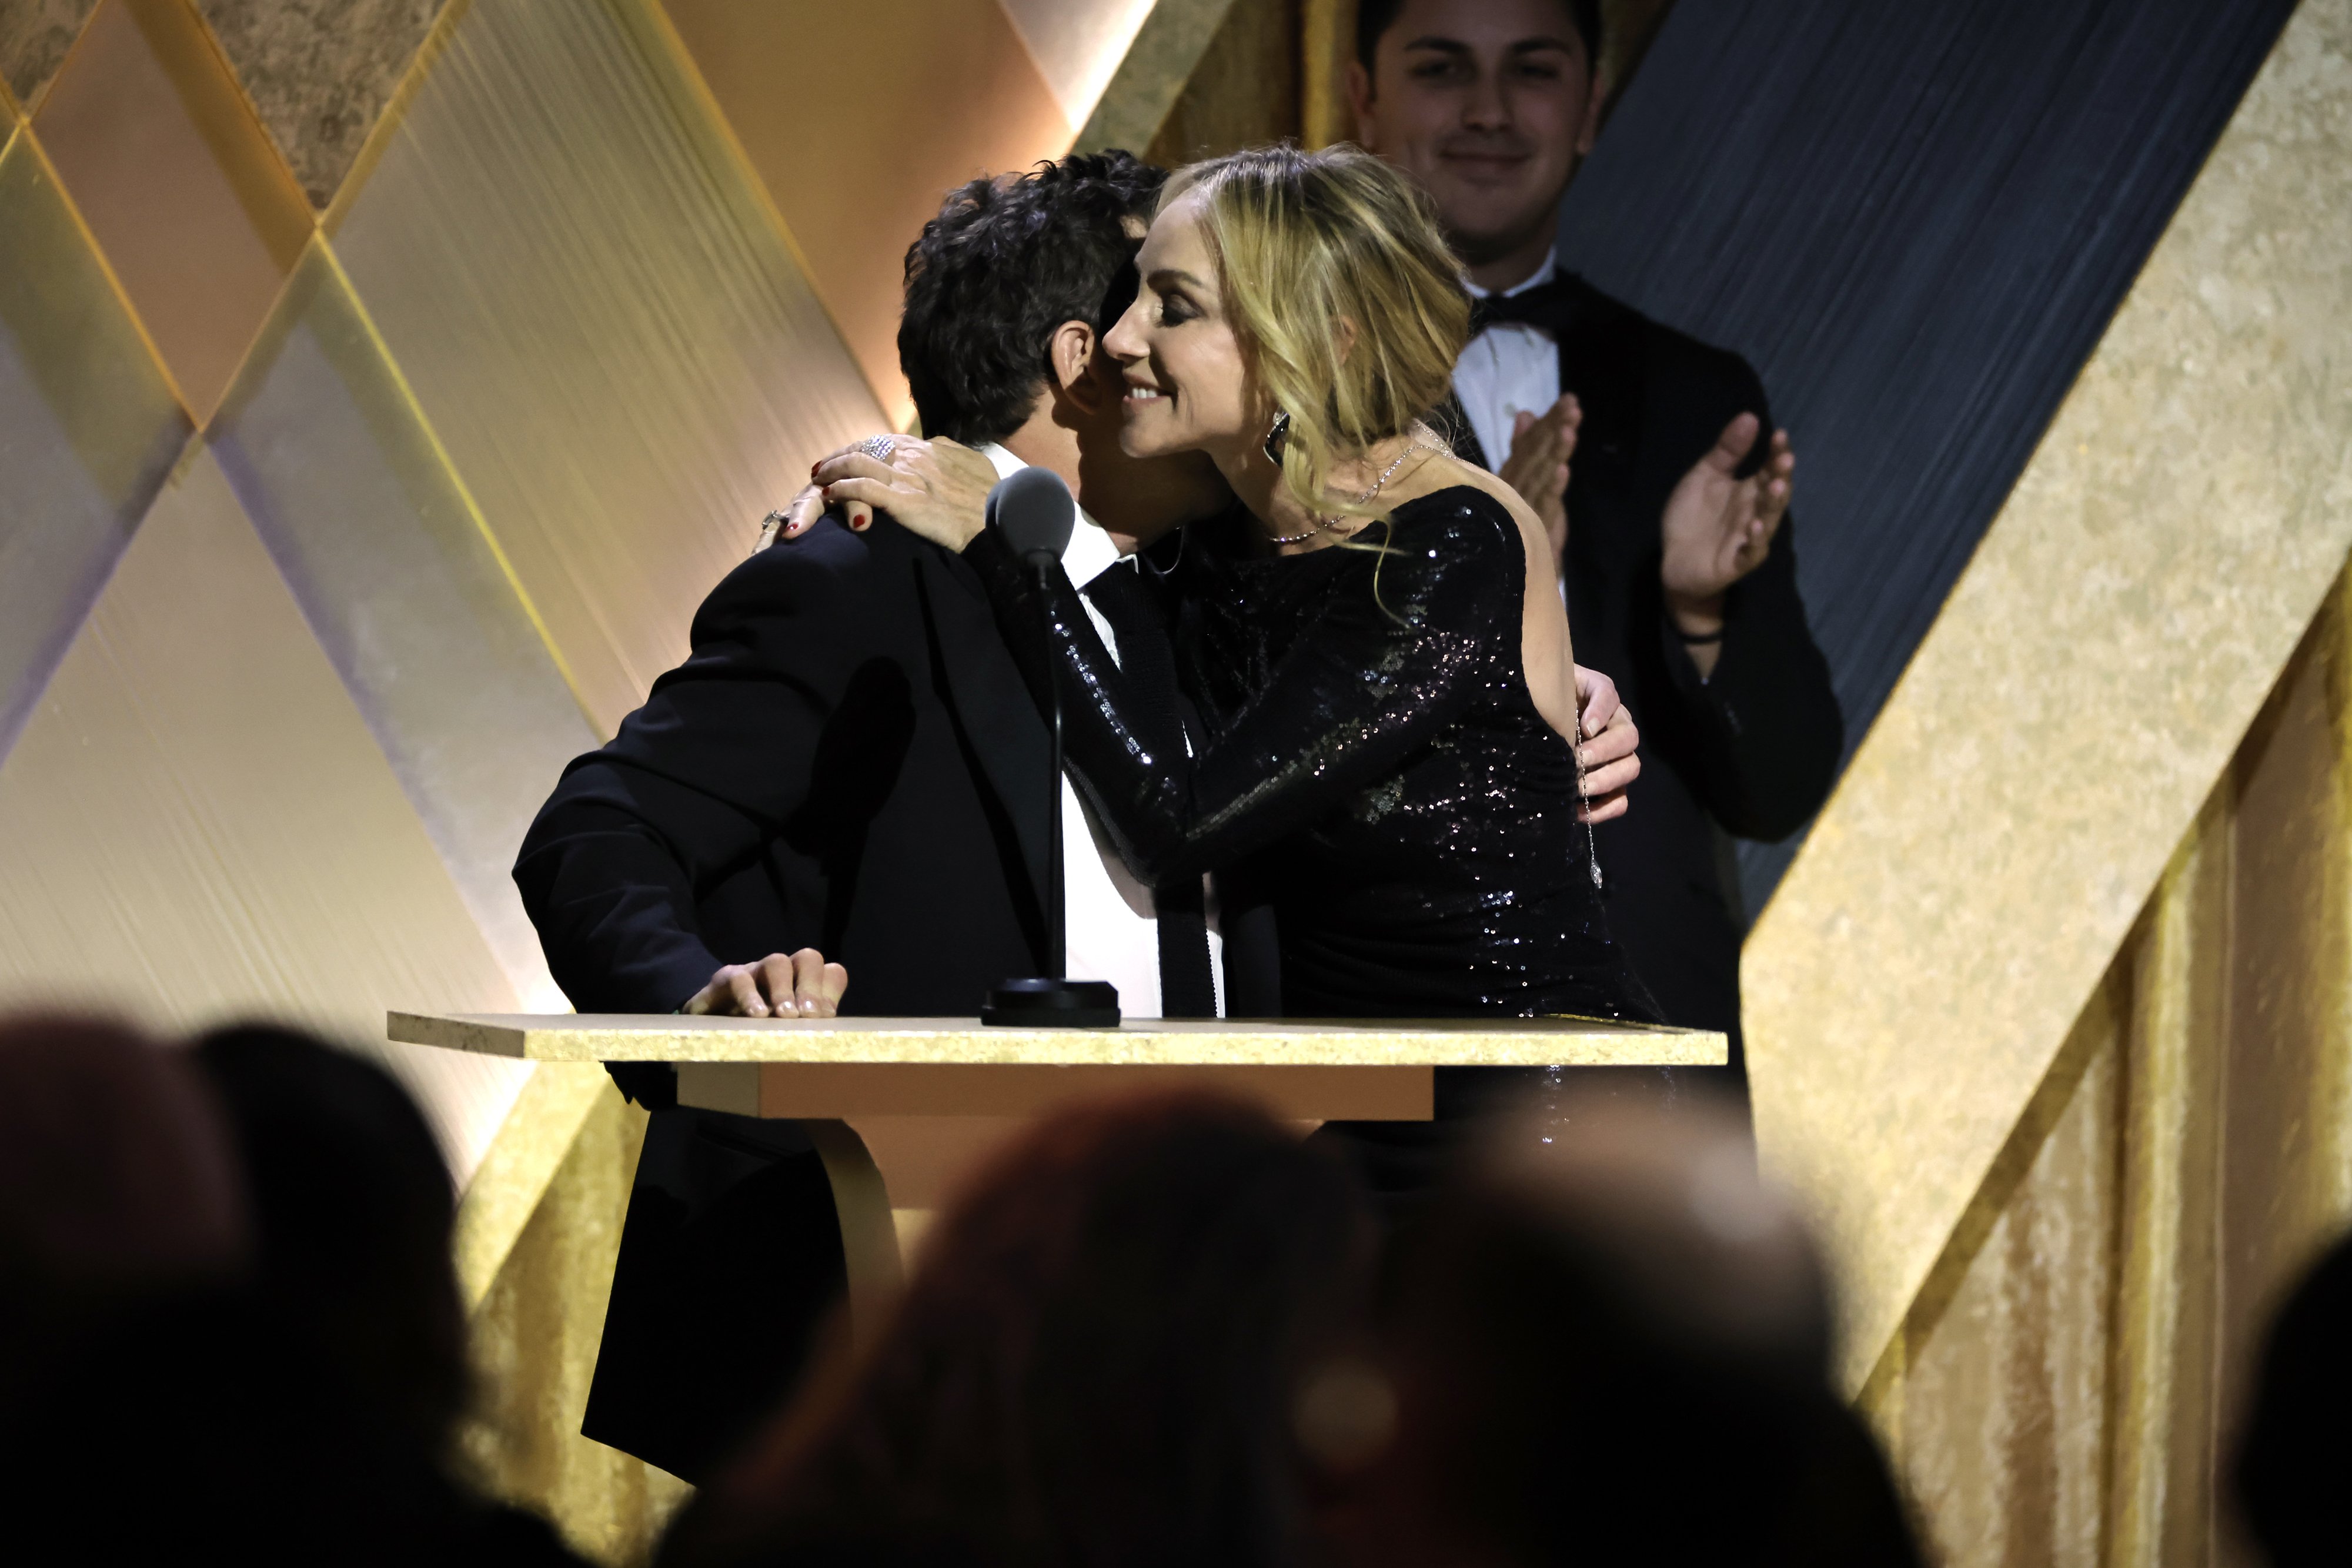 Michael J. Fox hugs his wife, Tracy Pollan onstage during the Academy of Motion Picture Arts and Sciences 13th Governors Awards at Fairmont Century Plaza on November 19, 2022, in Los Angeles, California. | Source: Getty Images